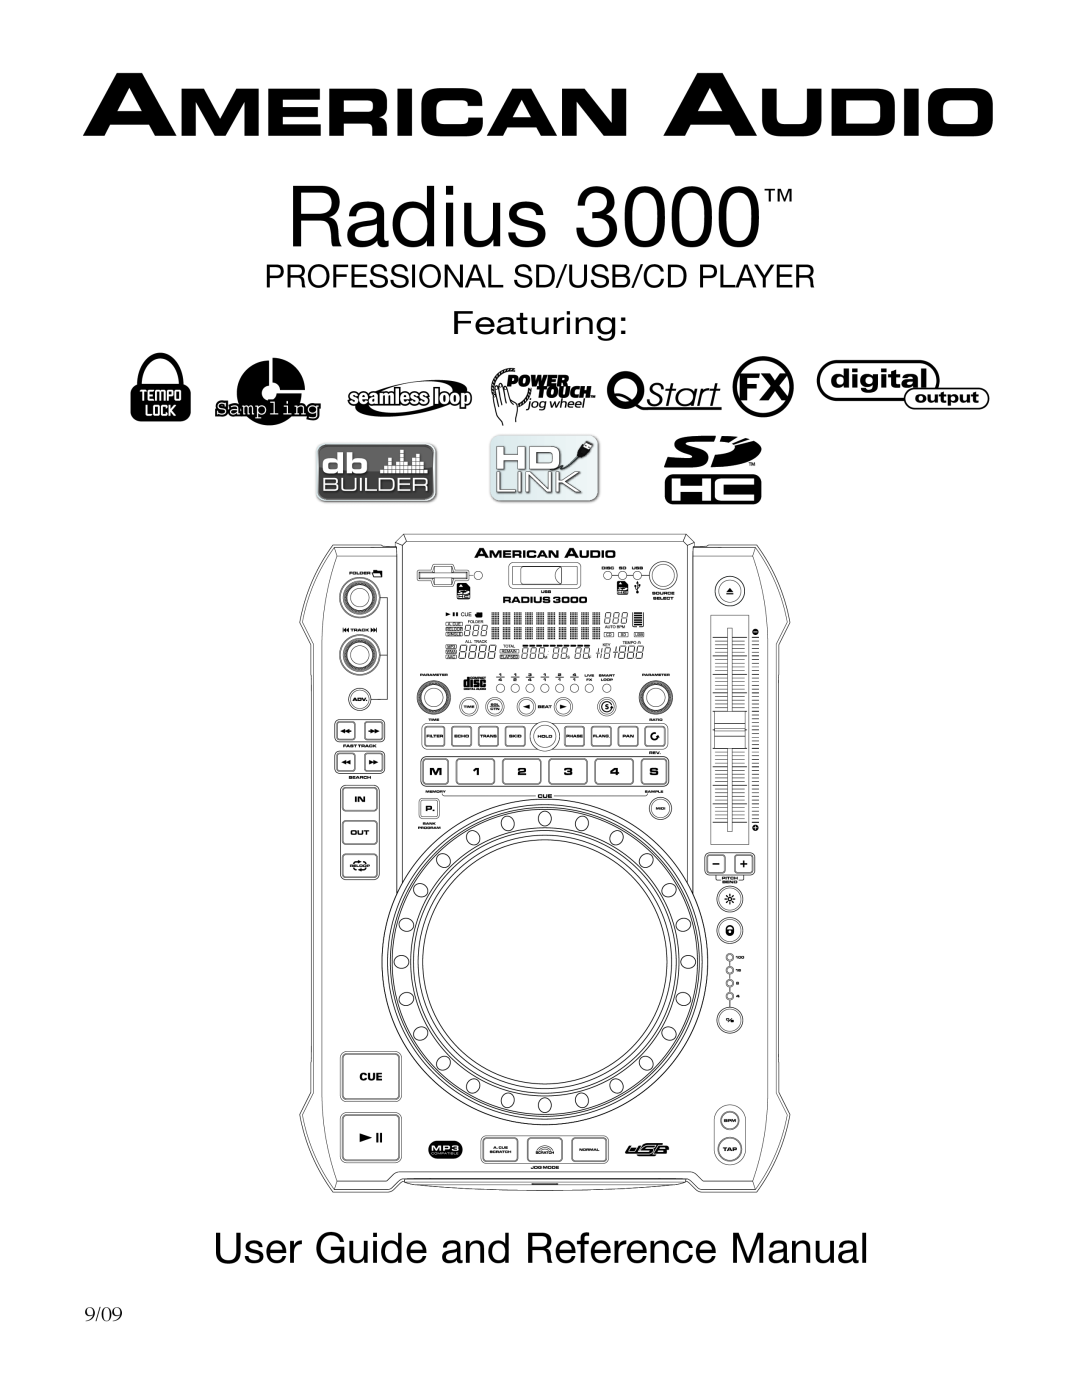 American Audio Radius 3000 manual User Guide and Reference Manual, PROFESSIONAL SD/USB/CD PLAYER Featuring, 9/09, Sampling 